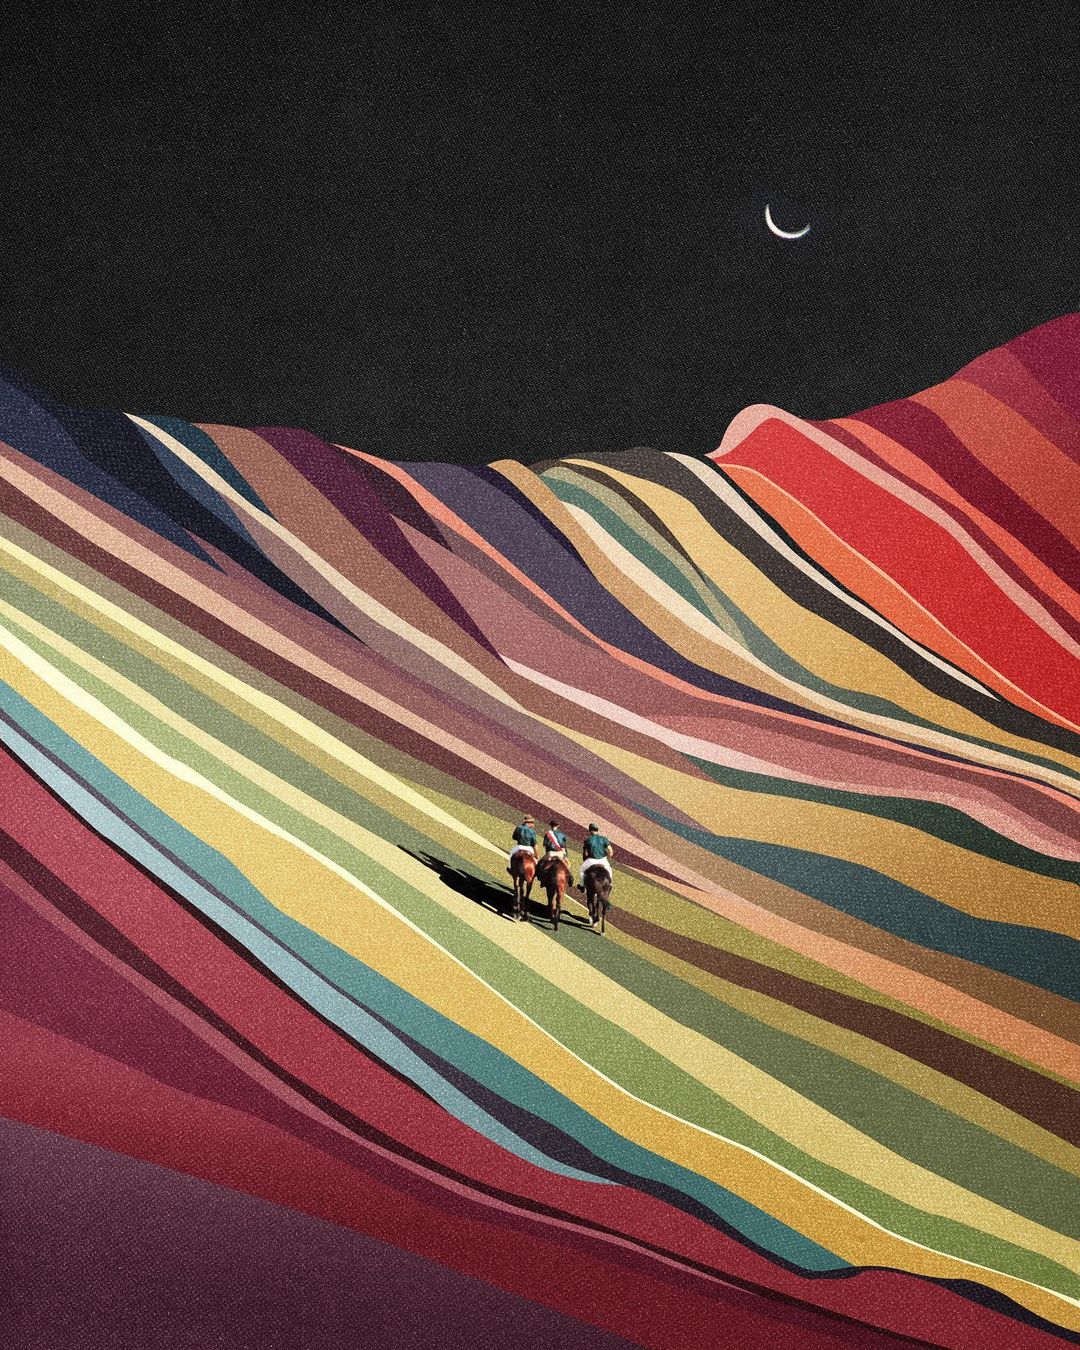 Absolutely Stunning Digital And Multicolored Collages By Jesse Stone 12